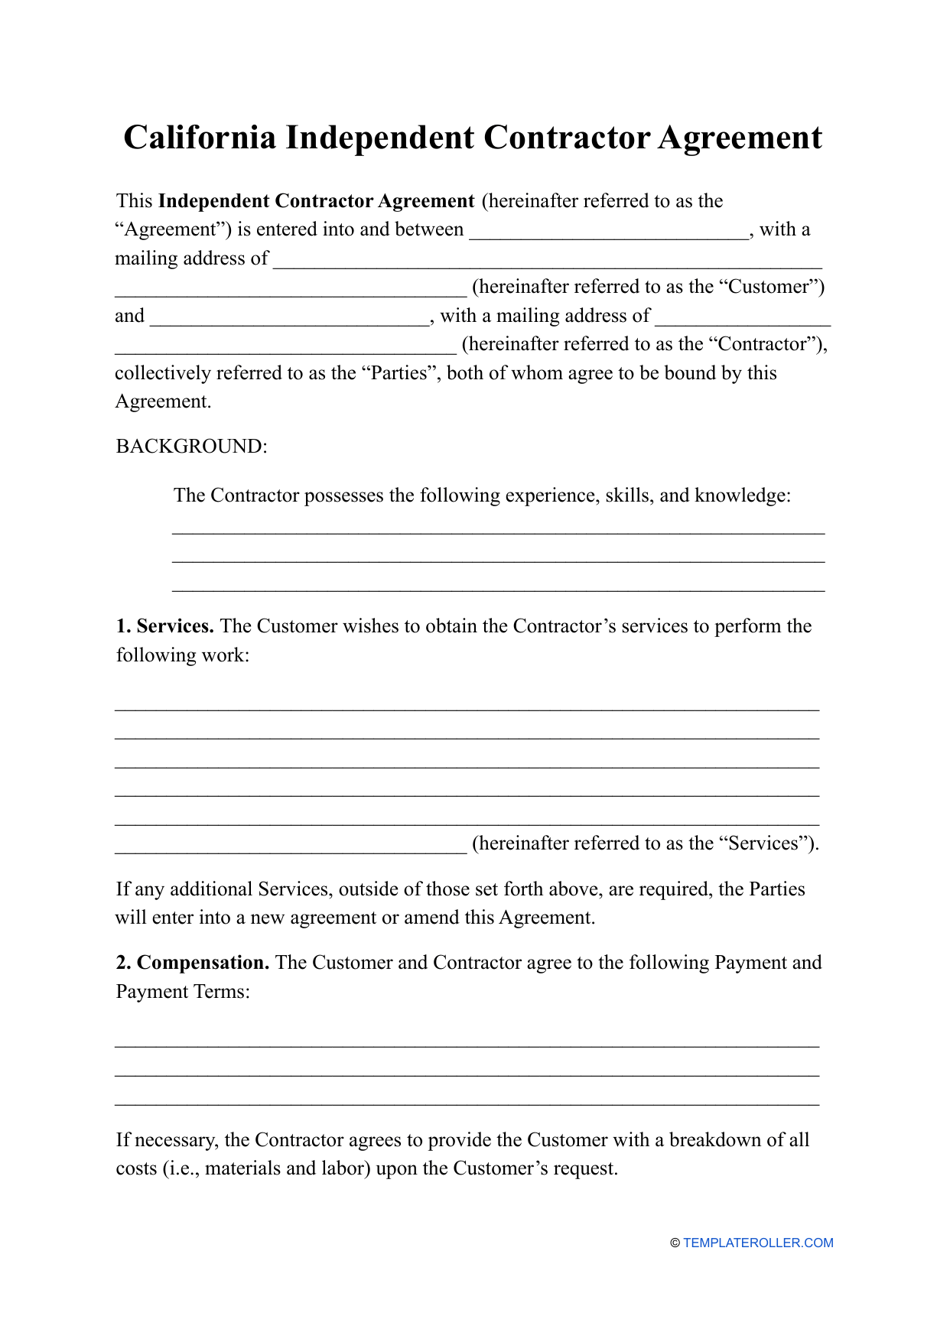 Independent Contractor Agreement Template - California, Page 1